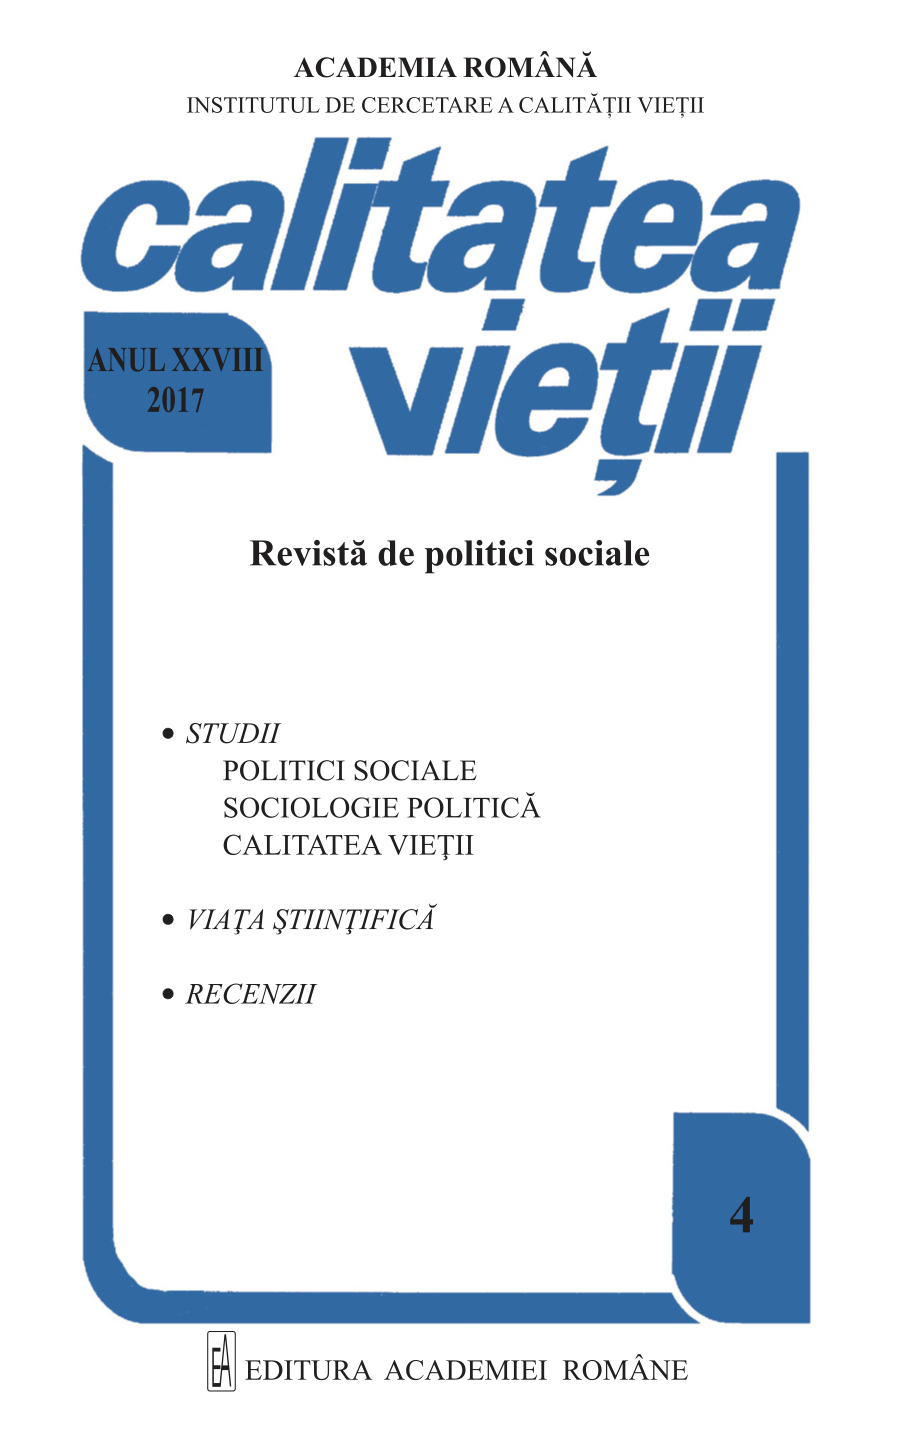 The main reform and development topics in the political and electoral programmes of the political parties during transition, in Romania Cover Image